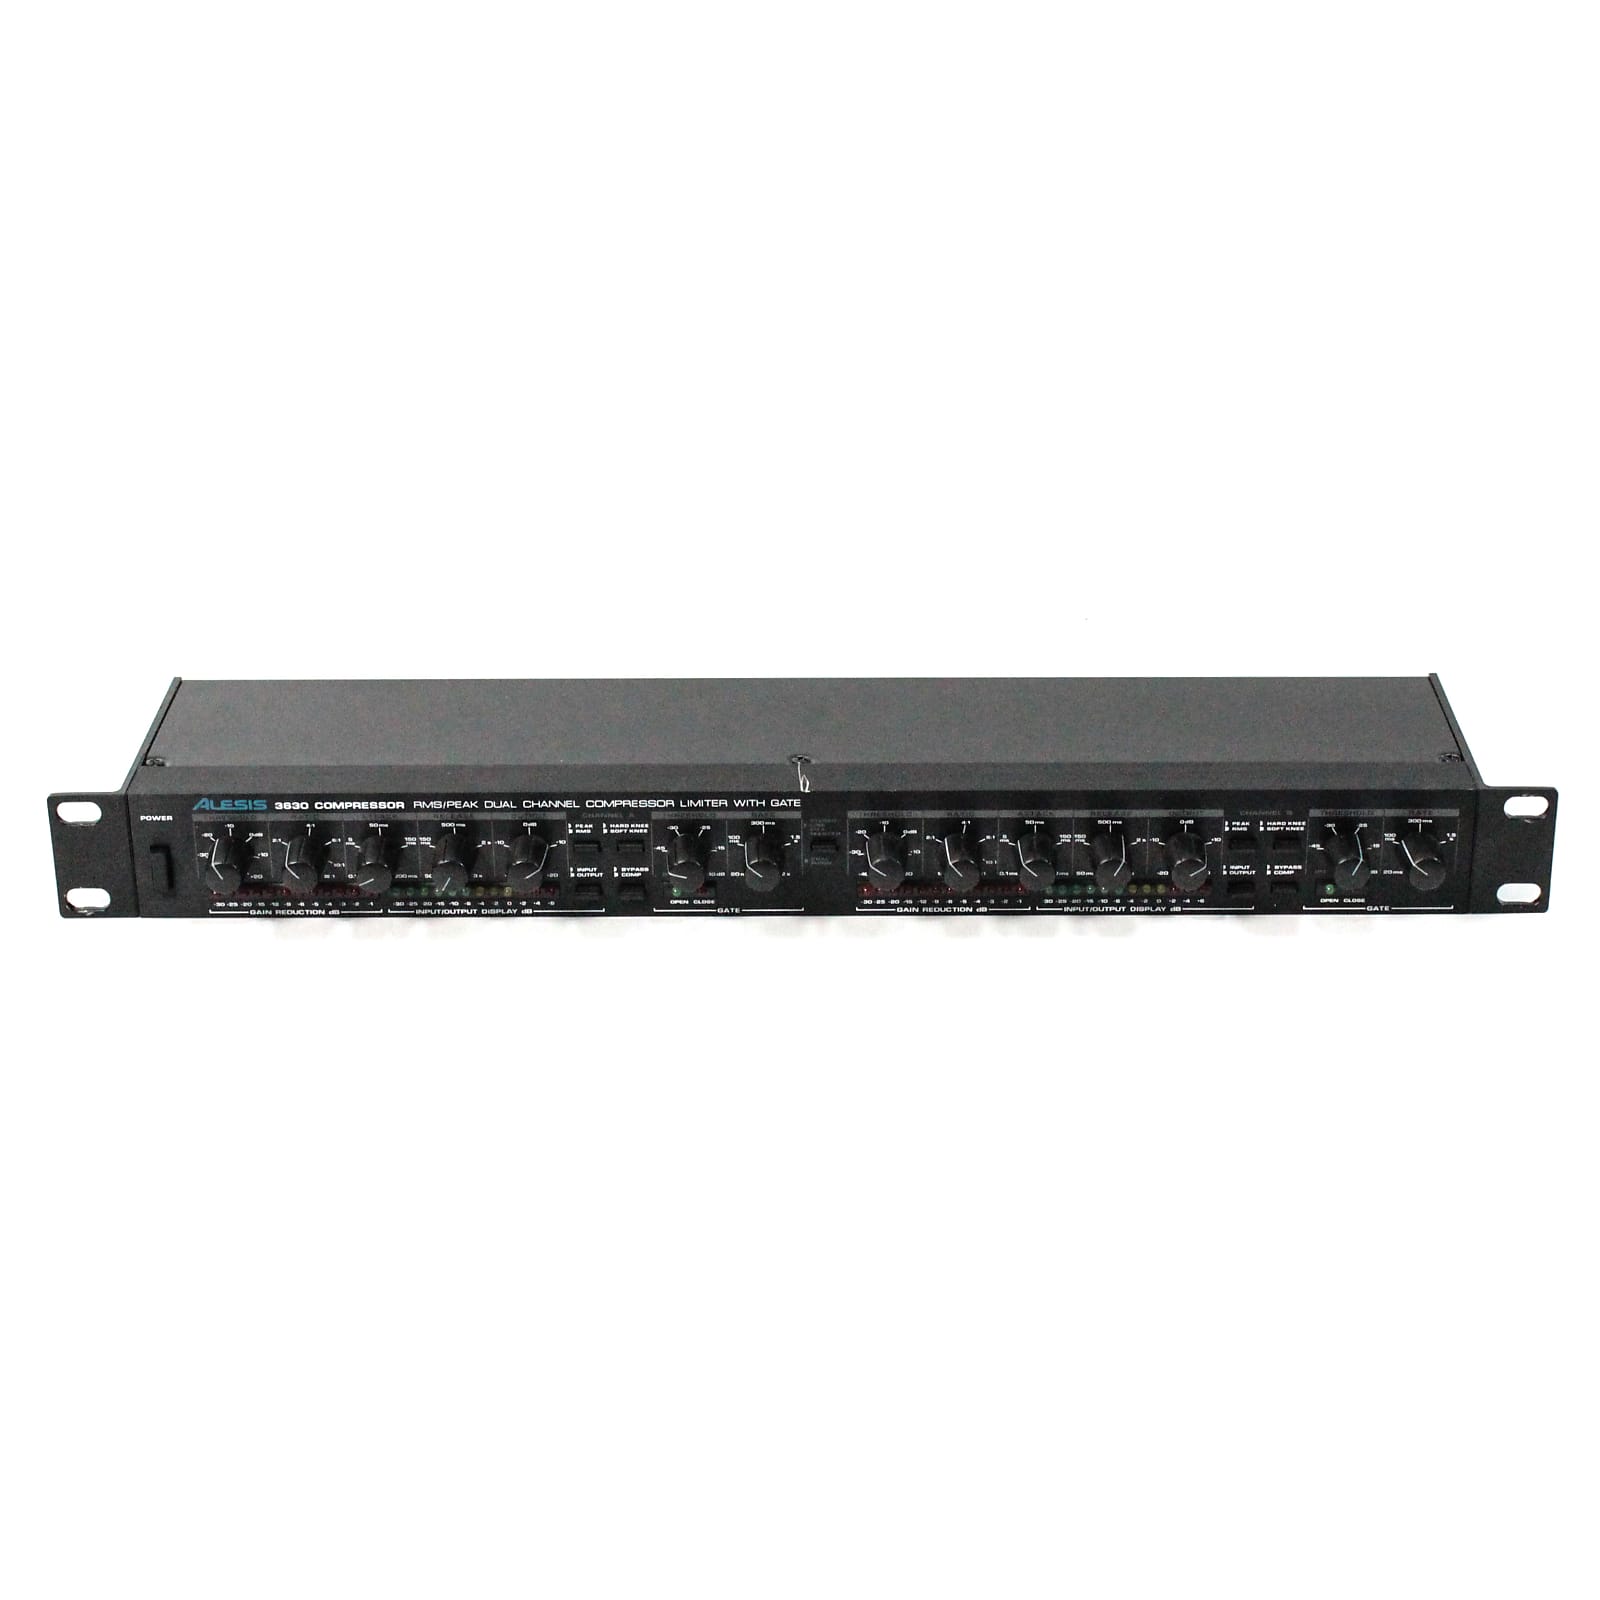 Alesis 3630 Dual-Channel Compressor / Limiter with Gate | Reverb